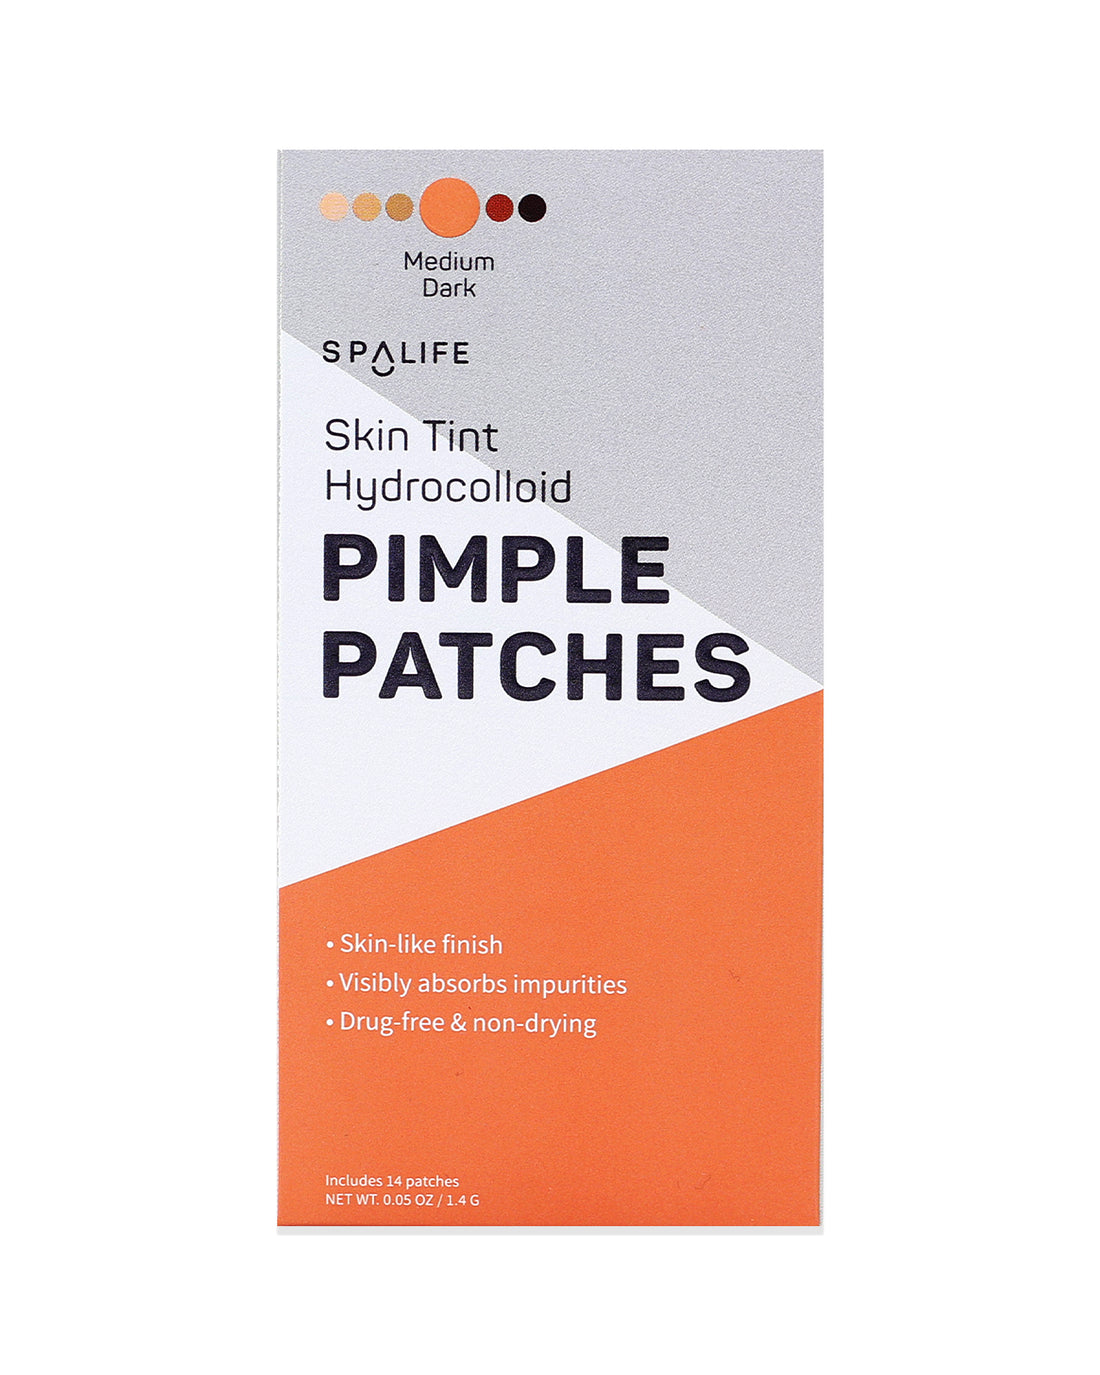 Skin_tint_pimple_patches_packe-885